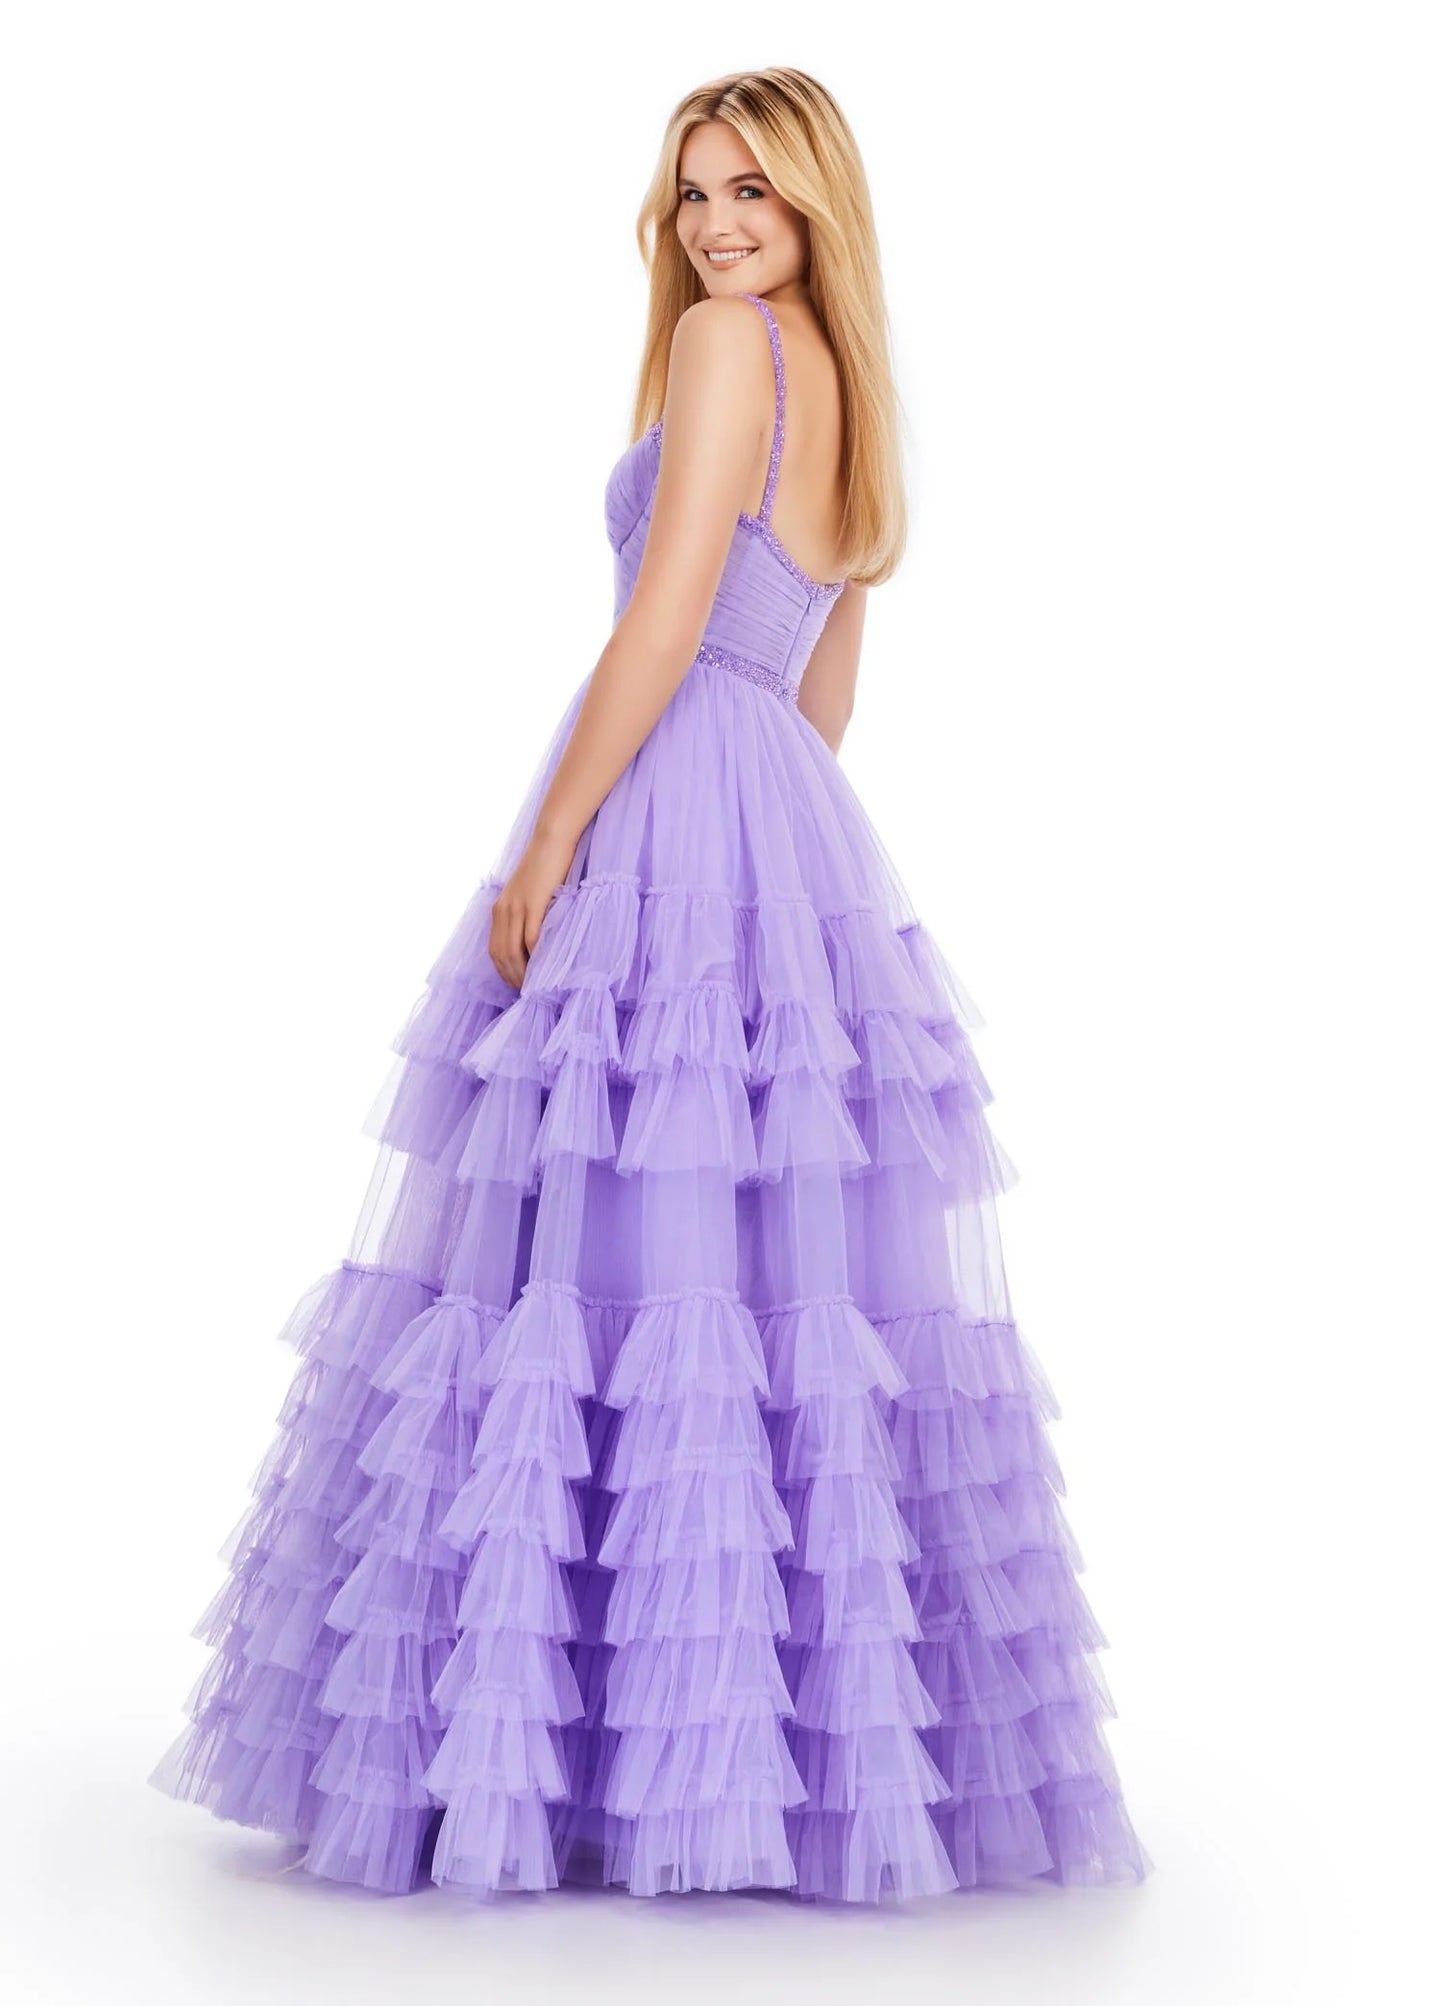 The Ashley Lauren11603 Long Tulle Ruffle Layer Ballgown Prom Dress is the perfect choice for your special occasion. With a beaded corset and ruffled layers for movement, this gown adds the perfect amount of glamour and elegance.